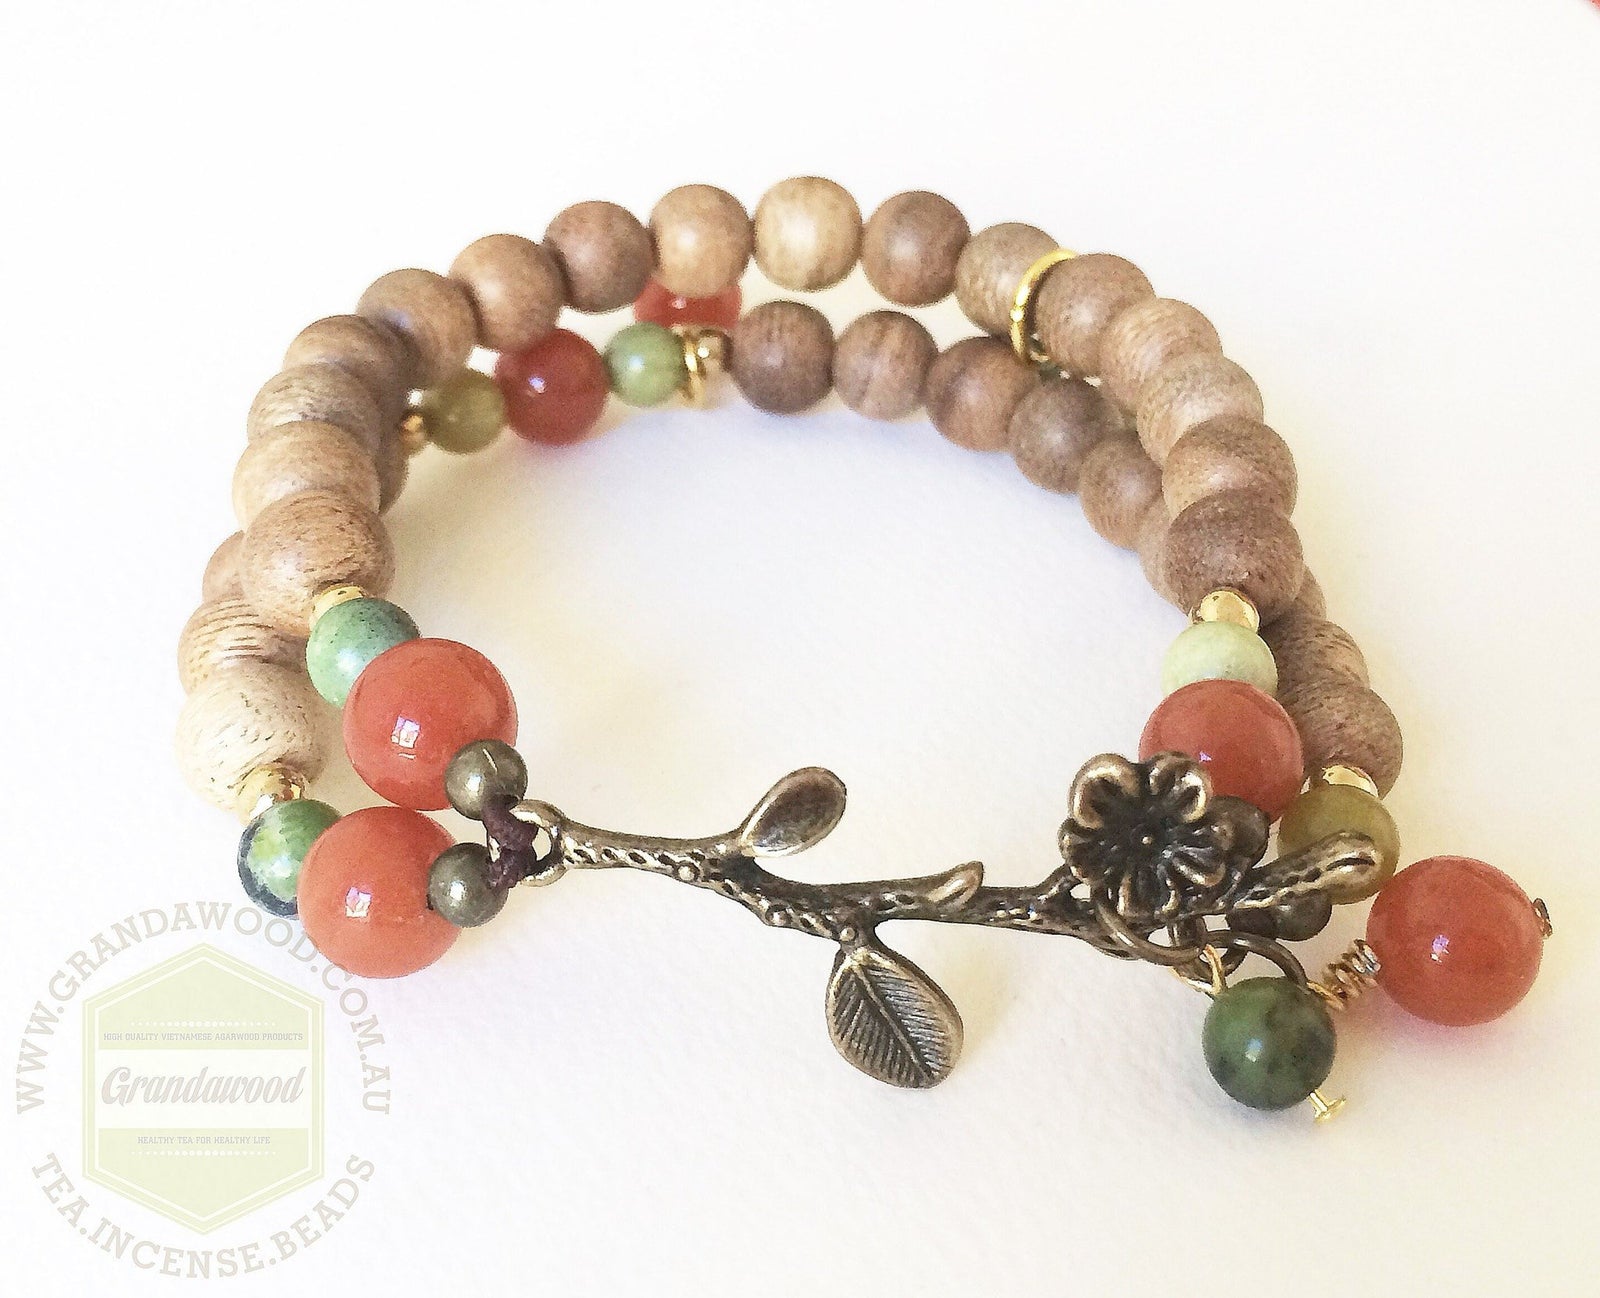 Agarwood lucky charm with red aventurine and grass turquoise bringing fortune and wealth -